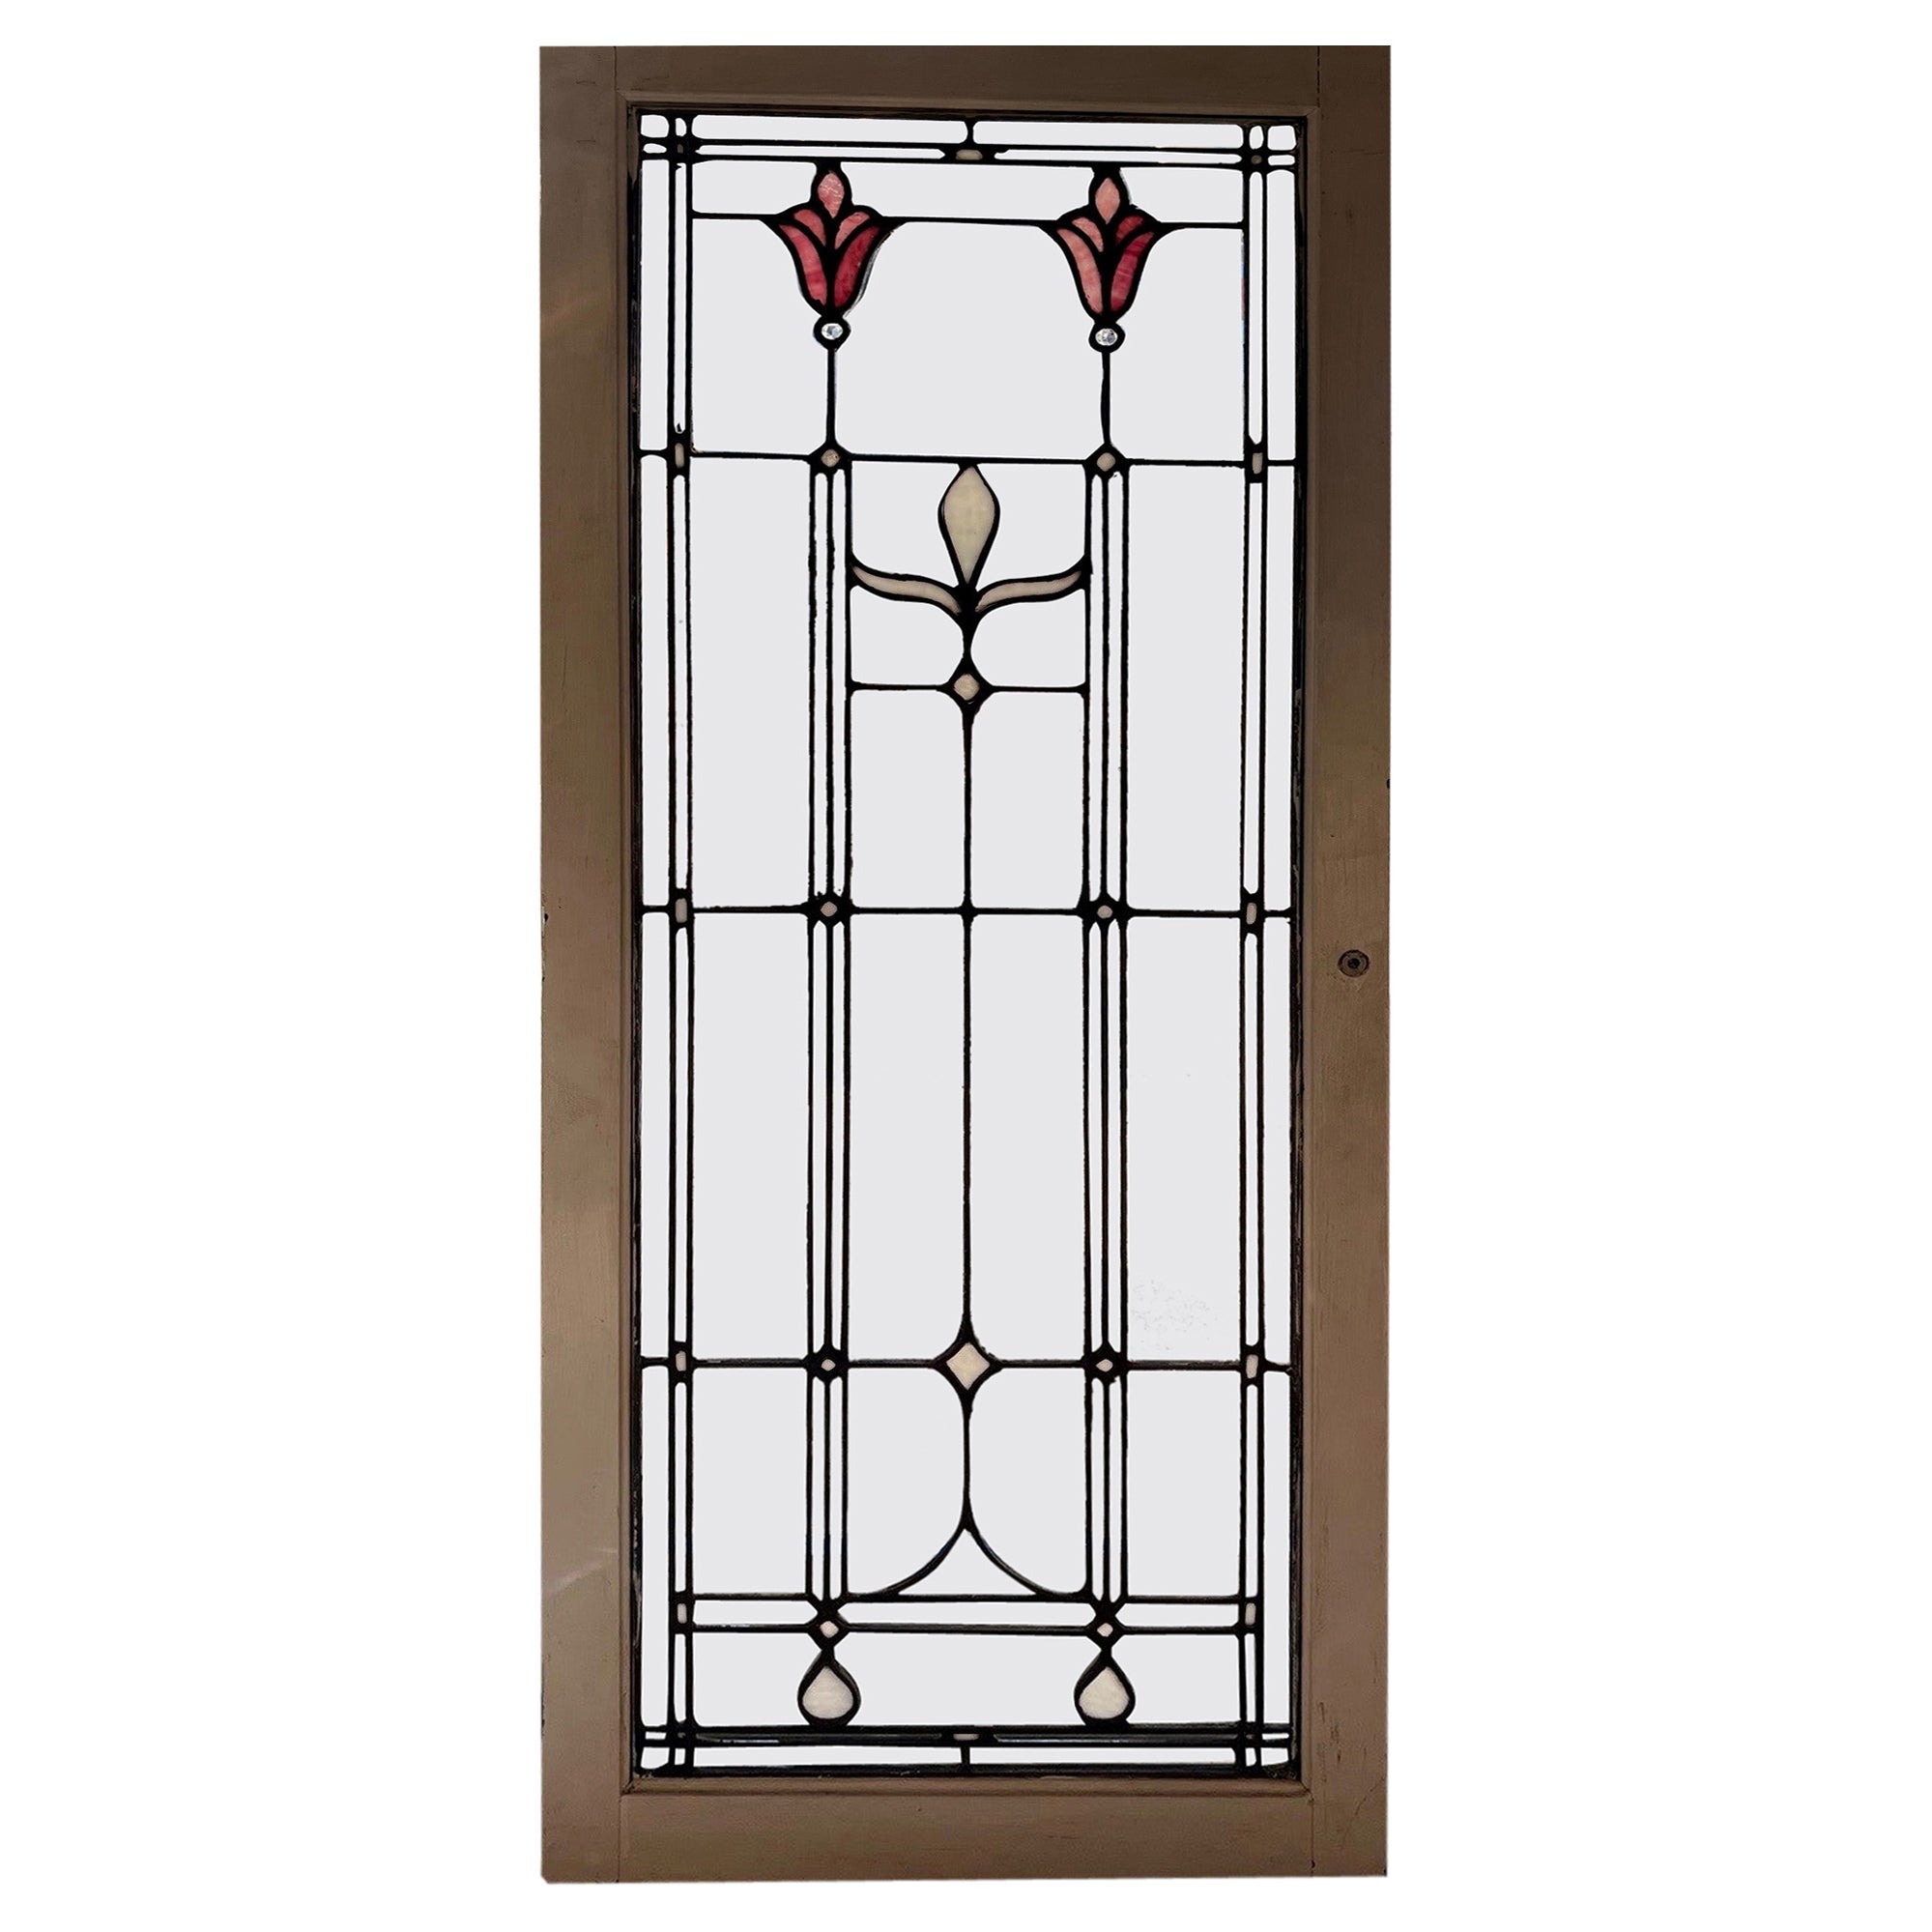 Art Deco Stained and Clear Glass Cabinet Door Panels 4 Pcs. Available